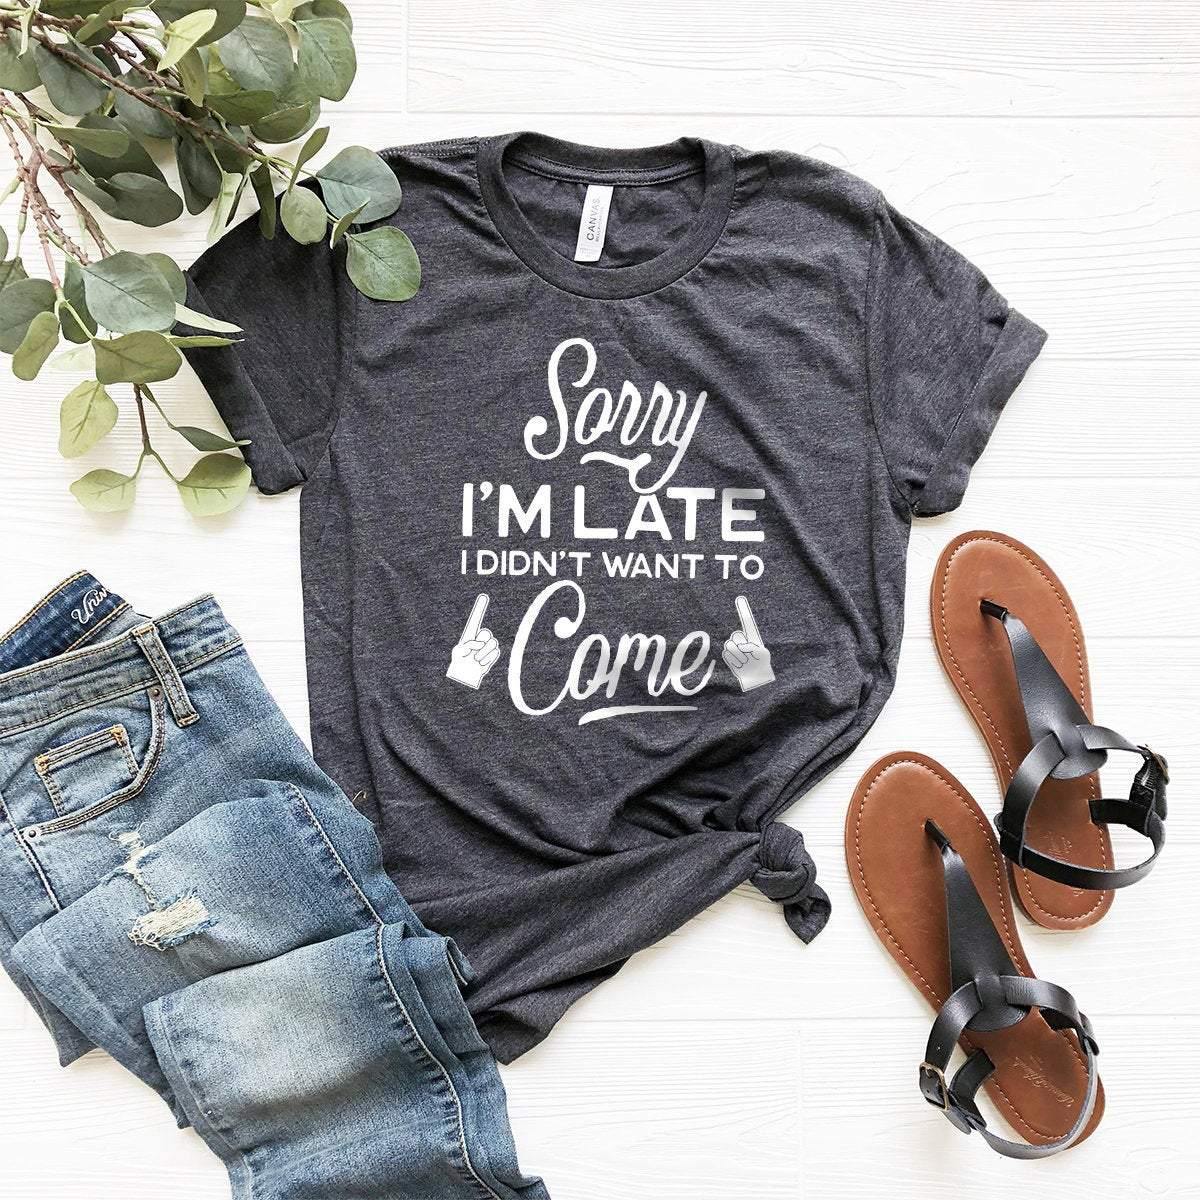 Sorry Not Sorry Tshirt, Slogan Hipster Tshirt, Sorry I'm Late I Didn't Want To Come Shirt, Sarcastic Shirt, Funny Sarcastic Shirt - Fastdeliverytees.com